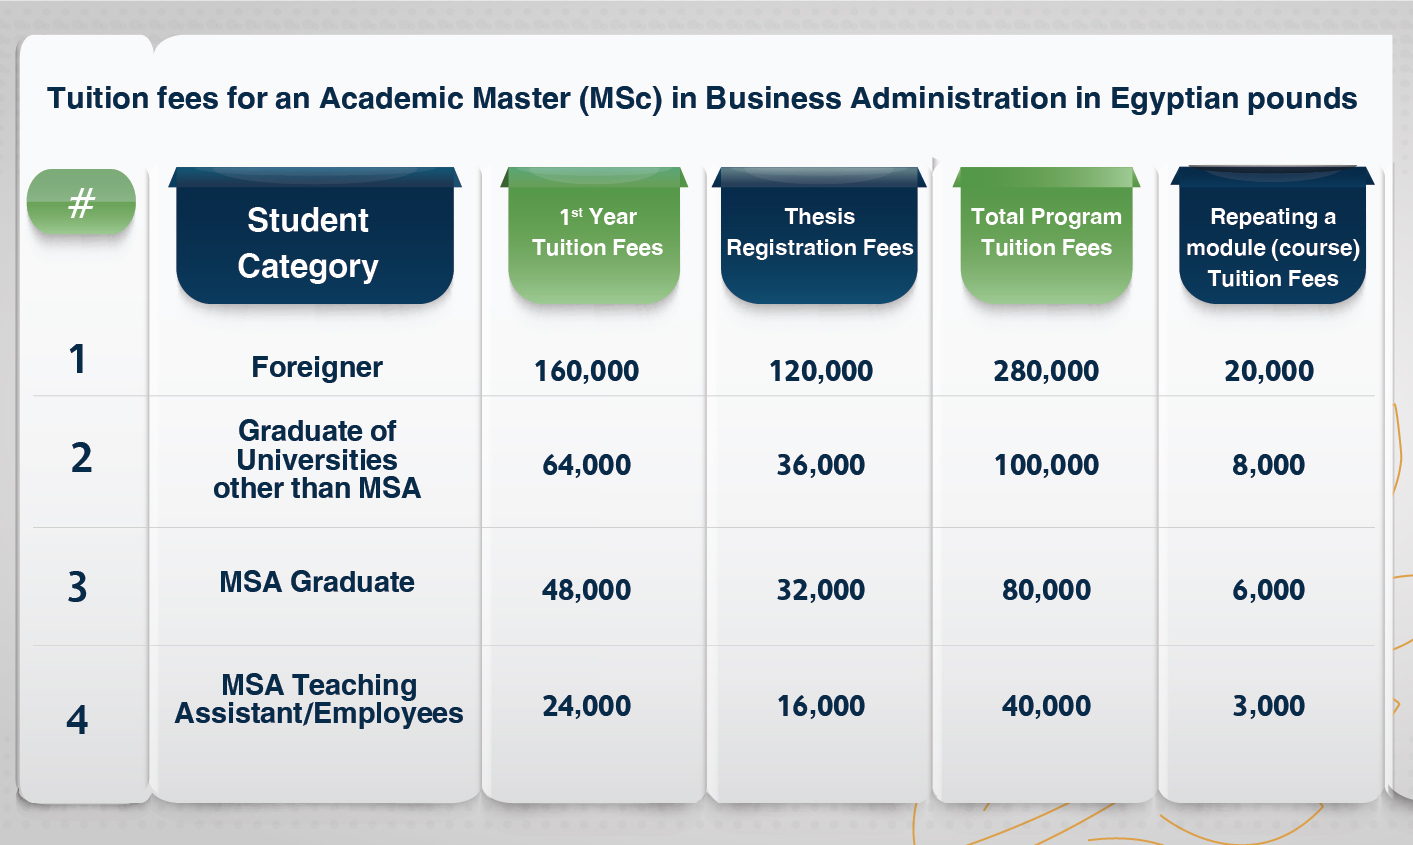 phd in business administration fees